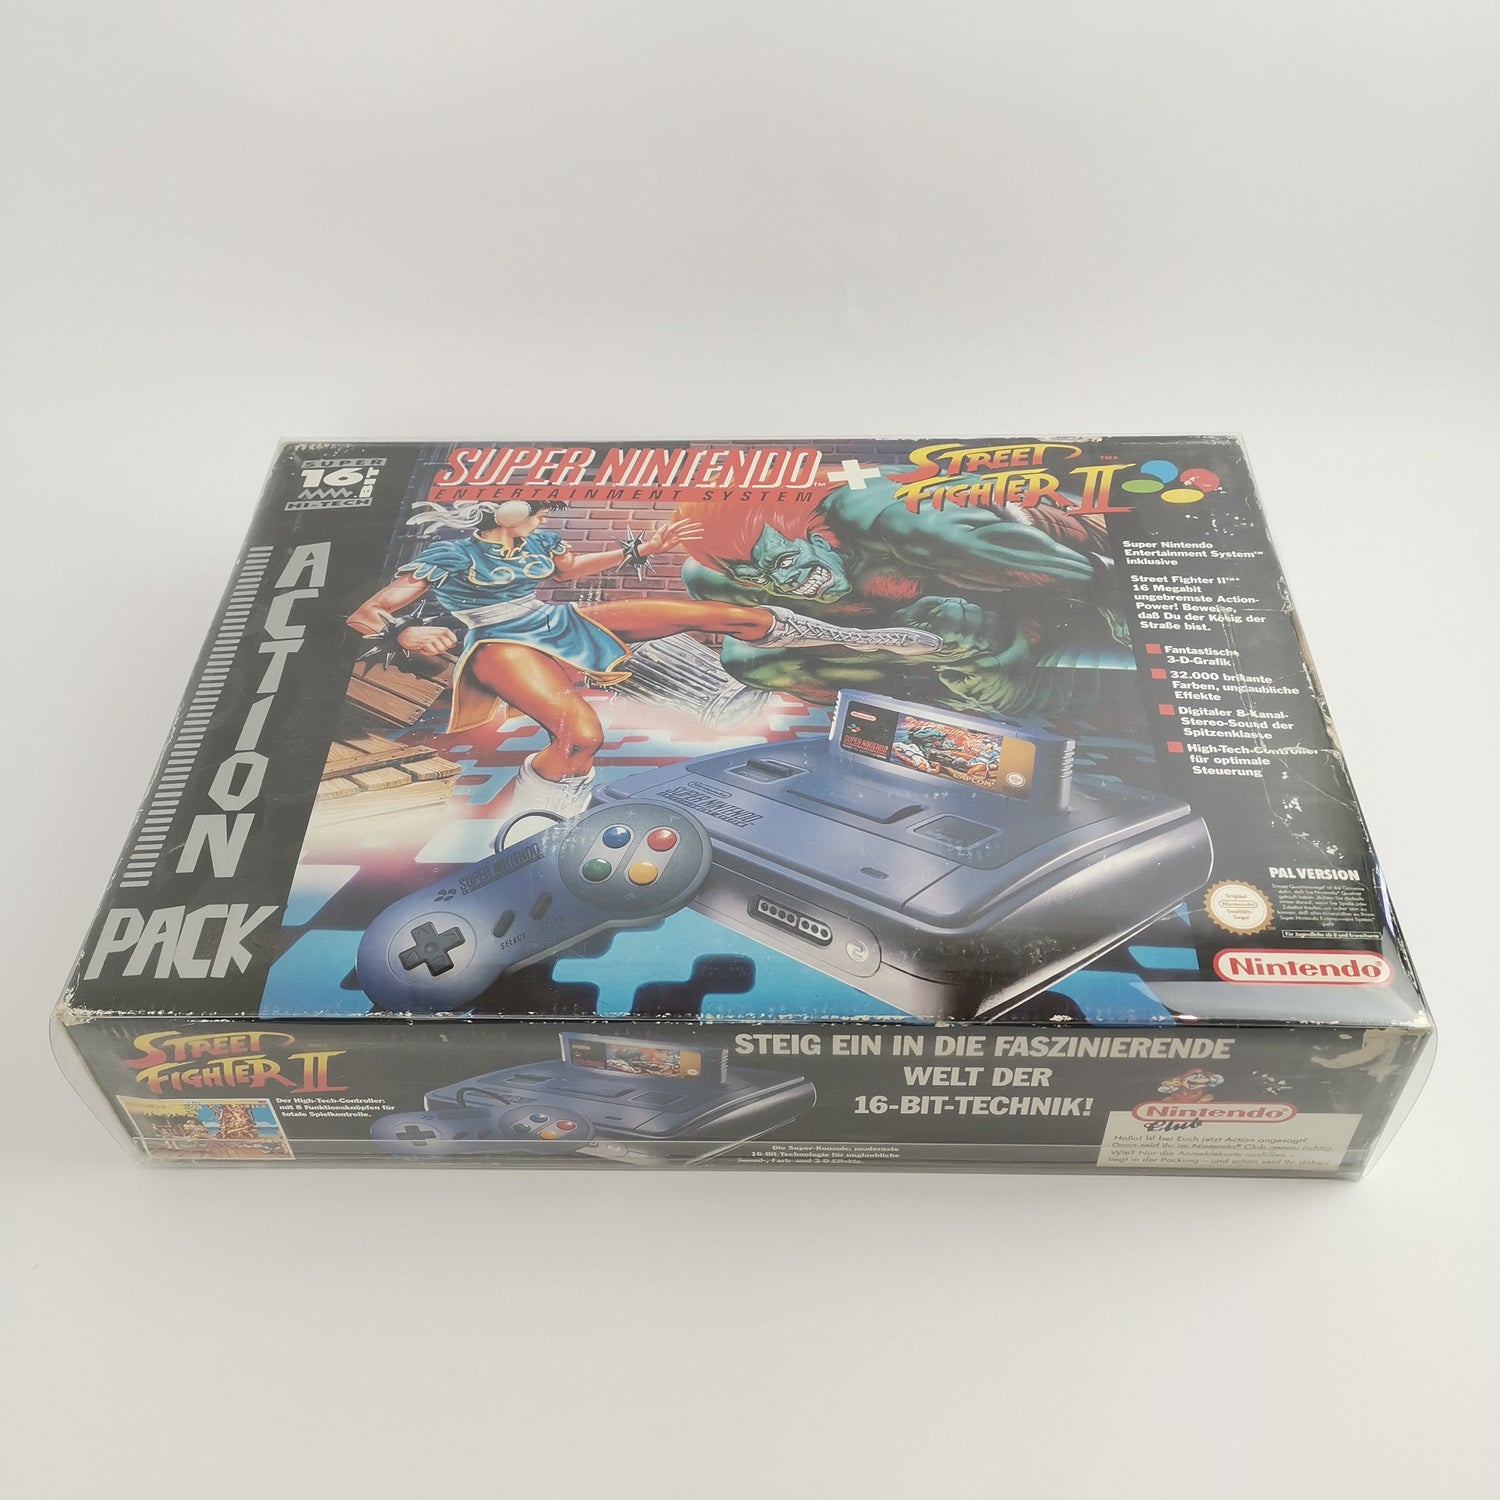 Super Nintendo Console: Street Fighter II 2 Action Pack | SNES Console OVP [2]